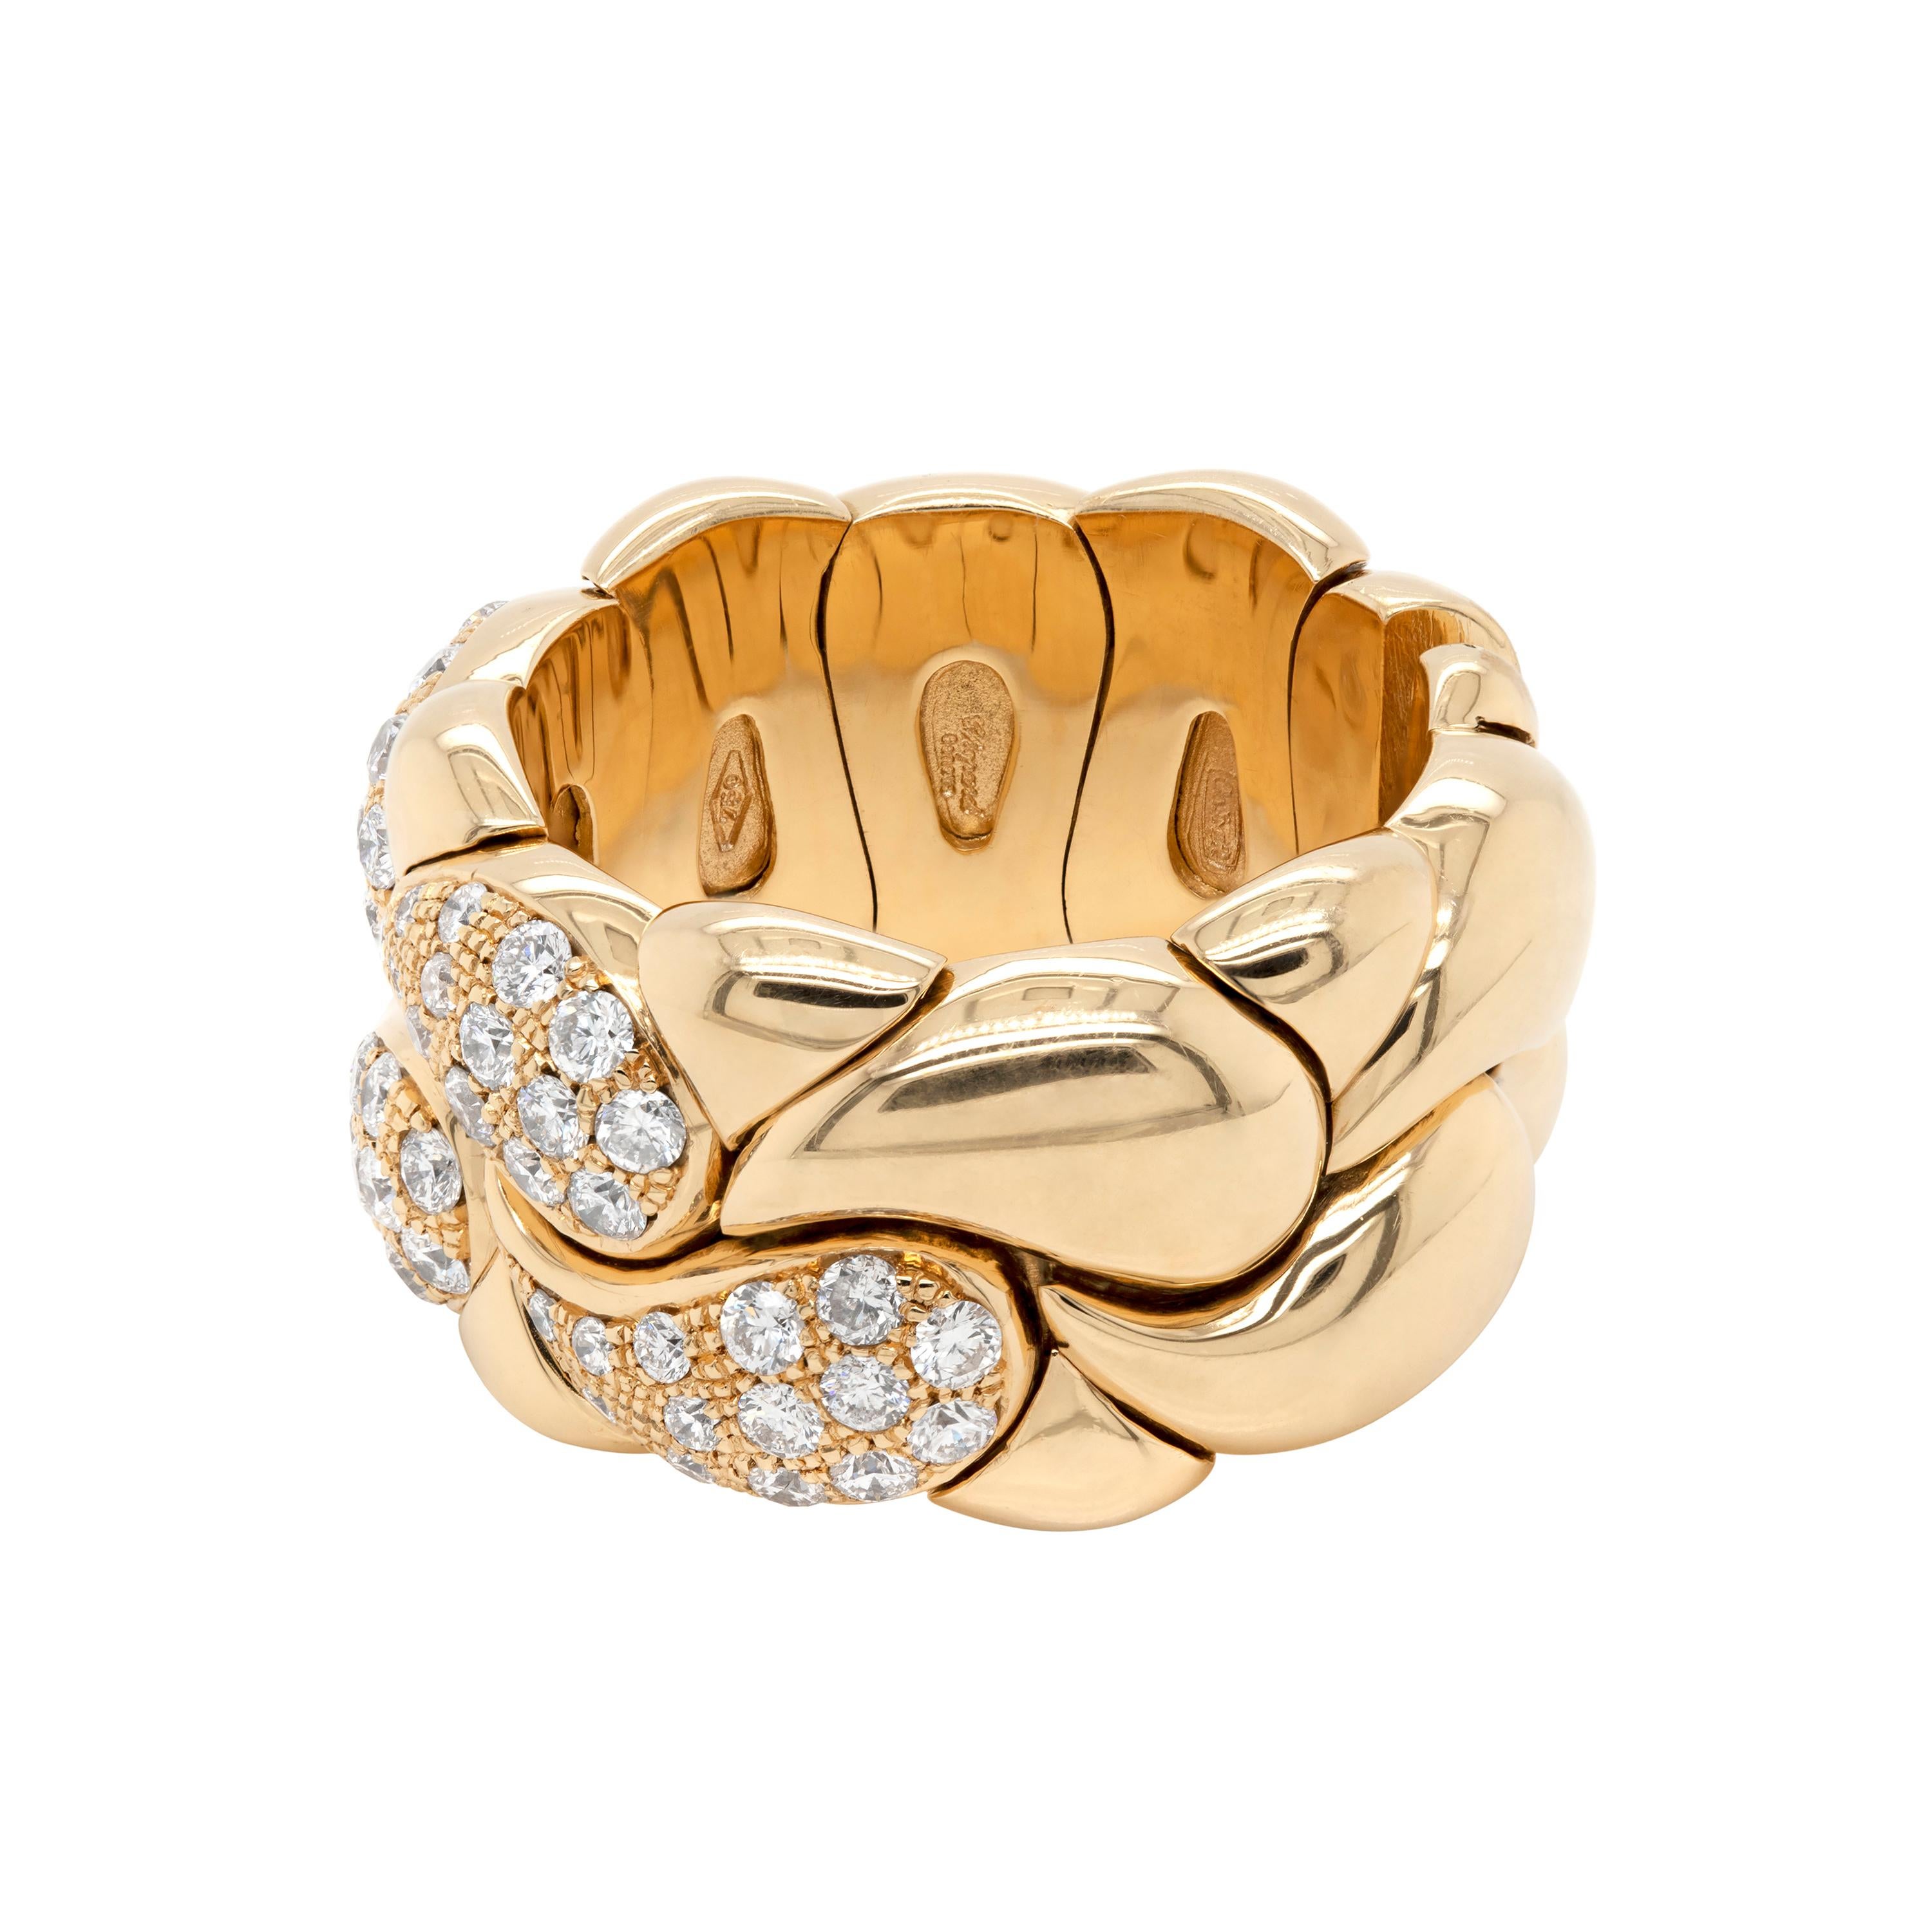 Chopard flexi ring from their classic Casmir collection set with 56 fine quality round brilliant cut diamonds weighing a total of 0.78 carat all pave set in 18 carat yellow gold. The diamonds have been after set on the original Chopard ring to